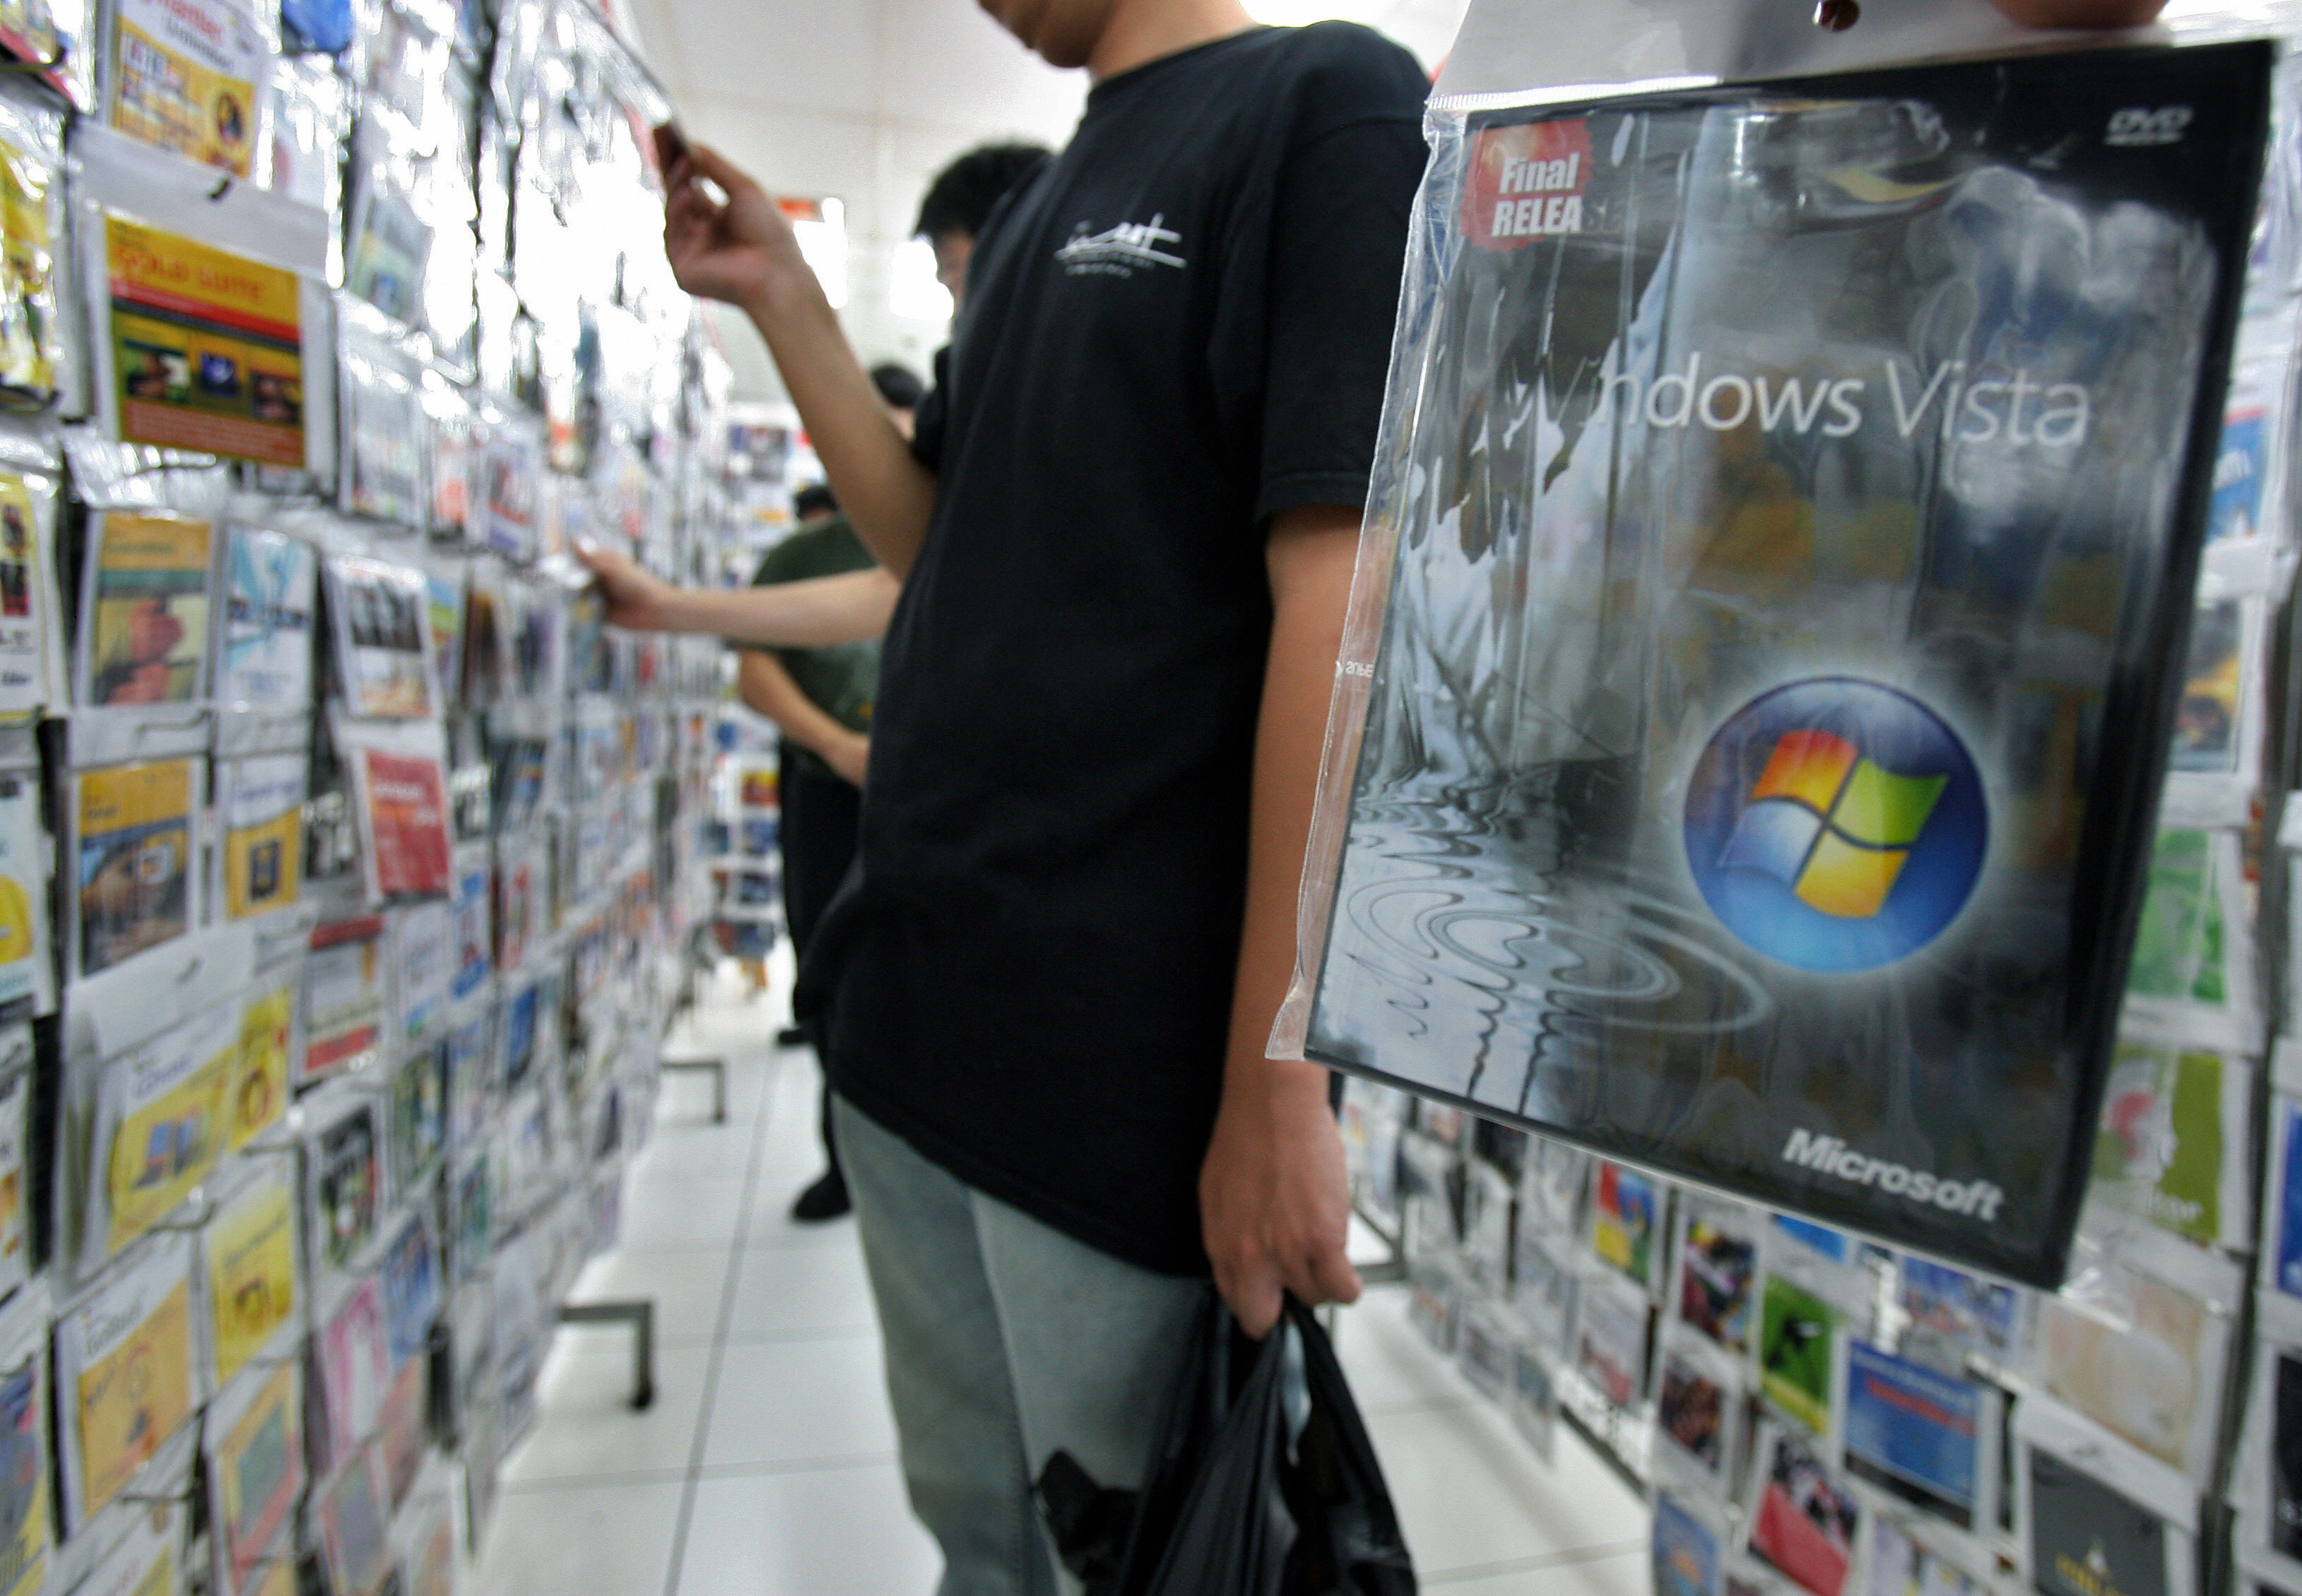 A man buys a pirated copy of Microsoft's operation system Windows Vista from a stall at a shopping mall in Jakarta, 30 January 2007. (Jewel Samad—AFP/Getty Images)